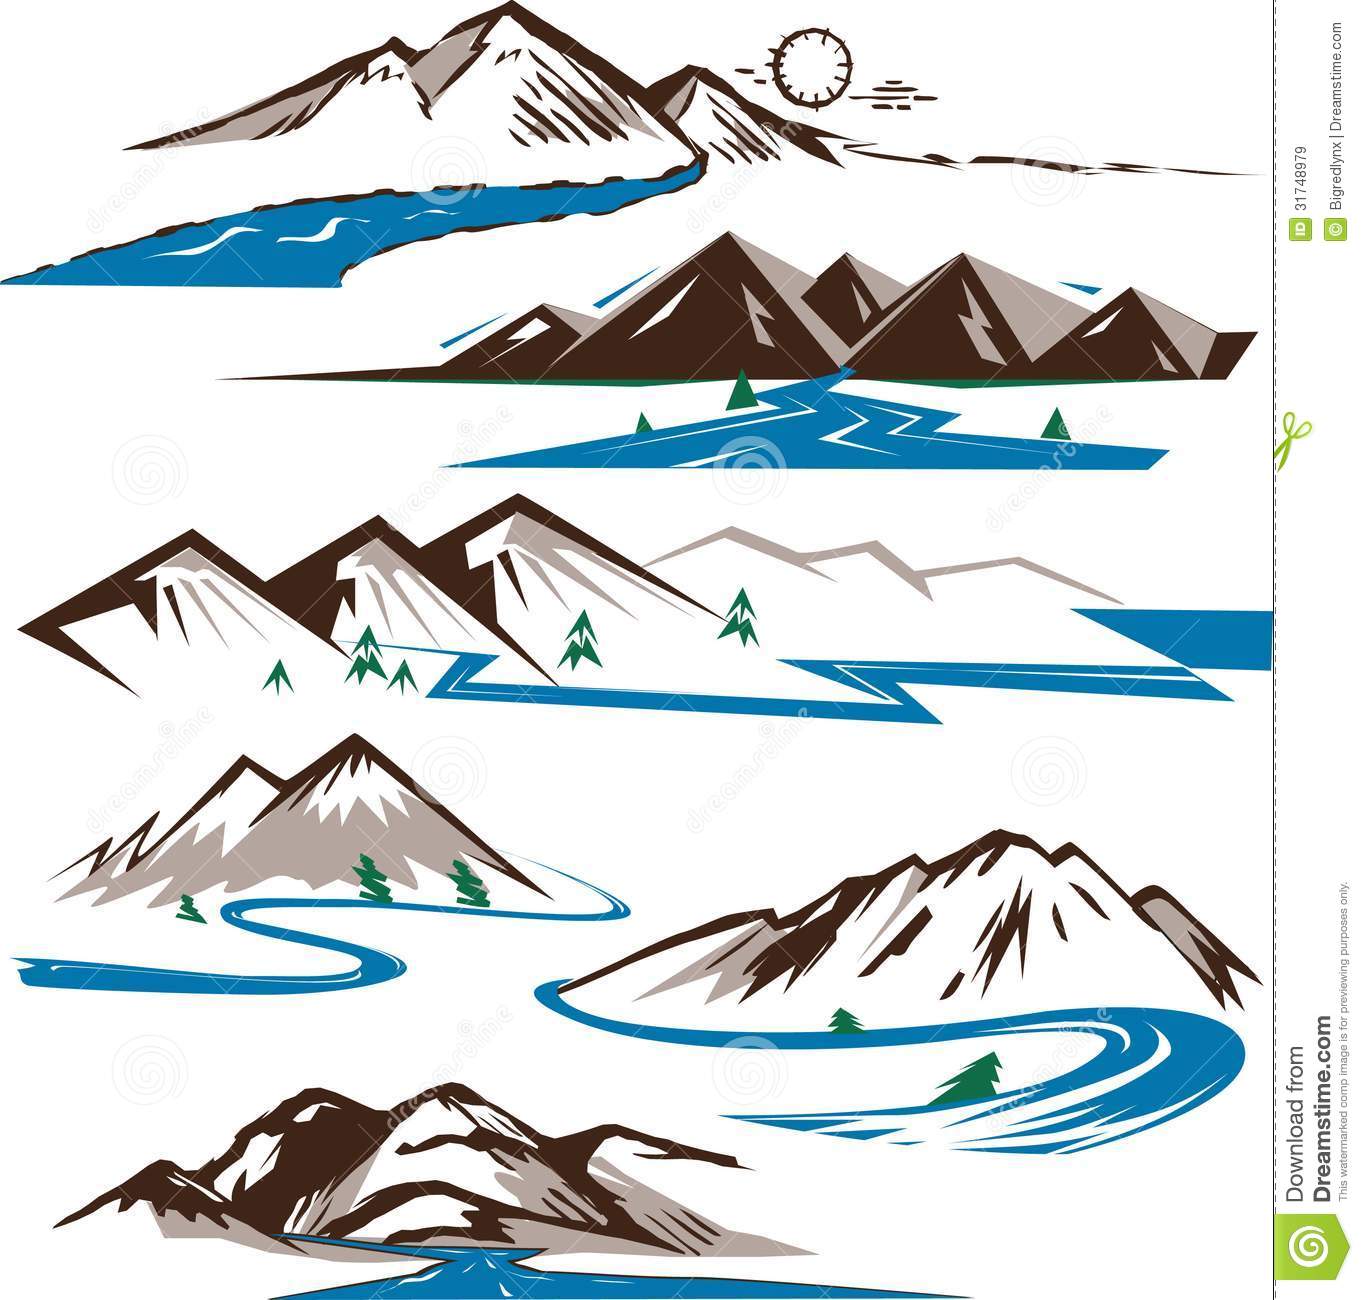 Clip Art Collection Of Stylized Rivers And Mountains